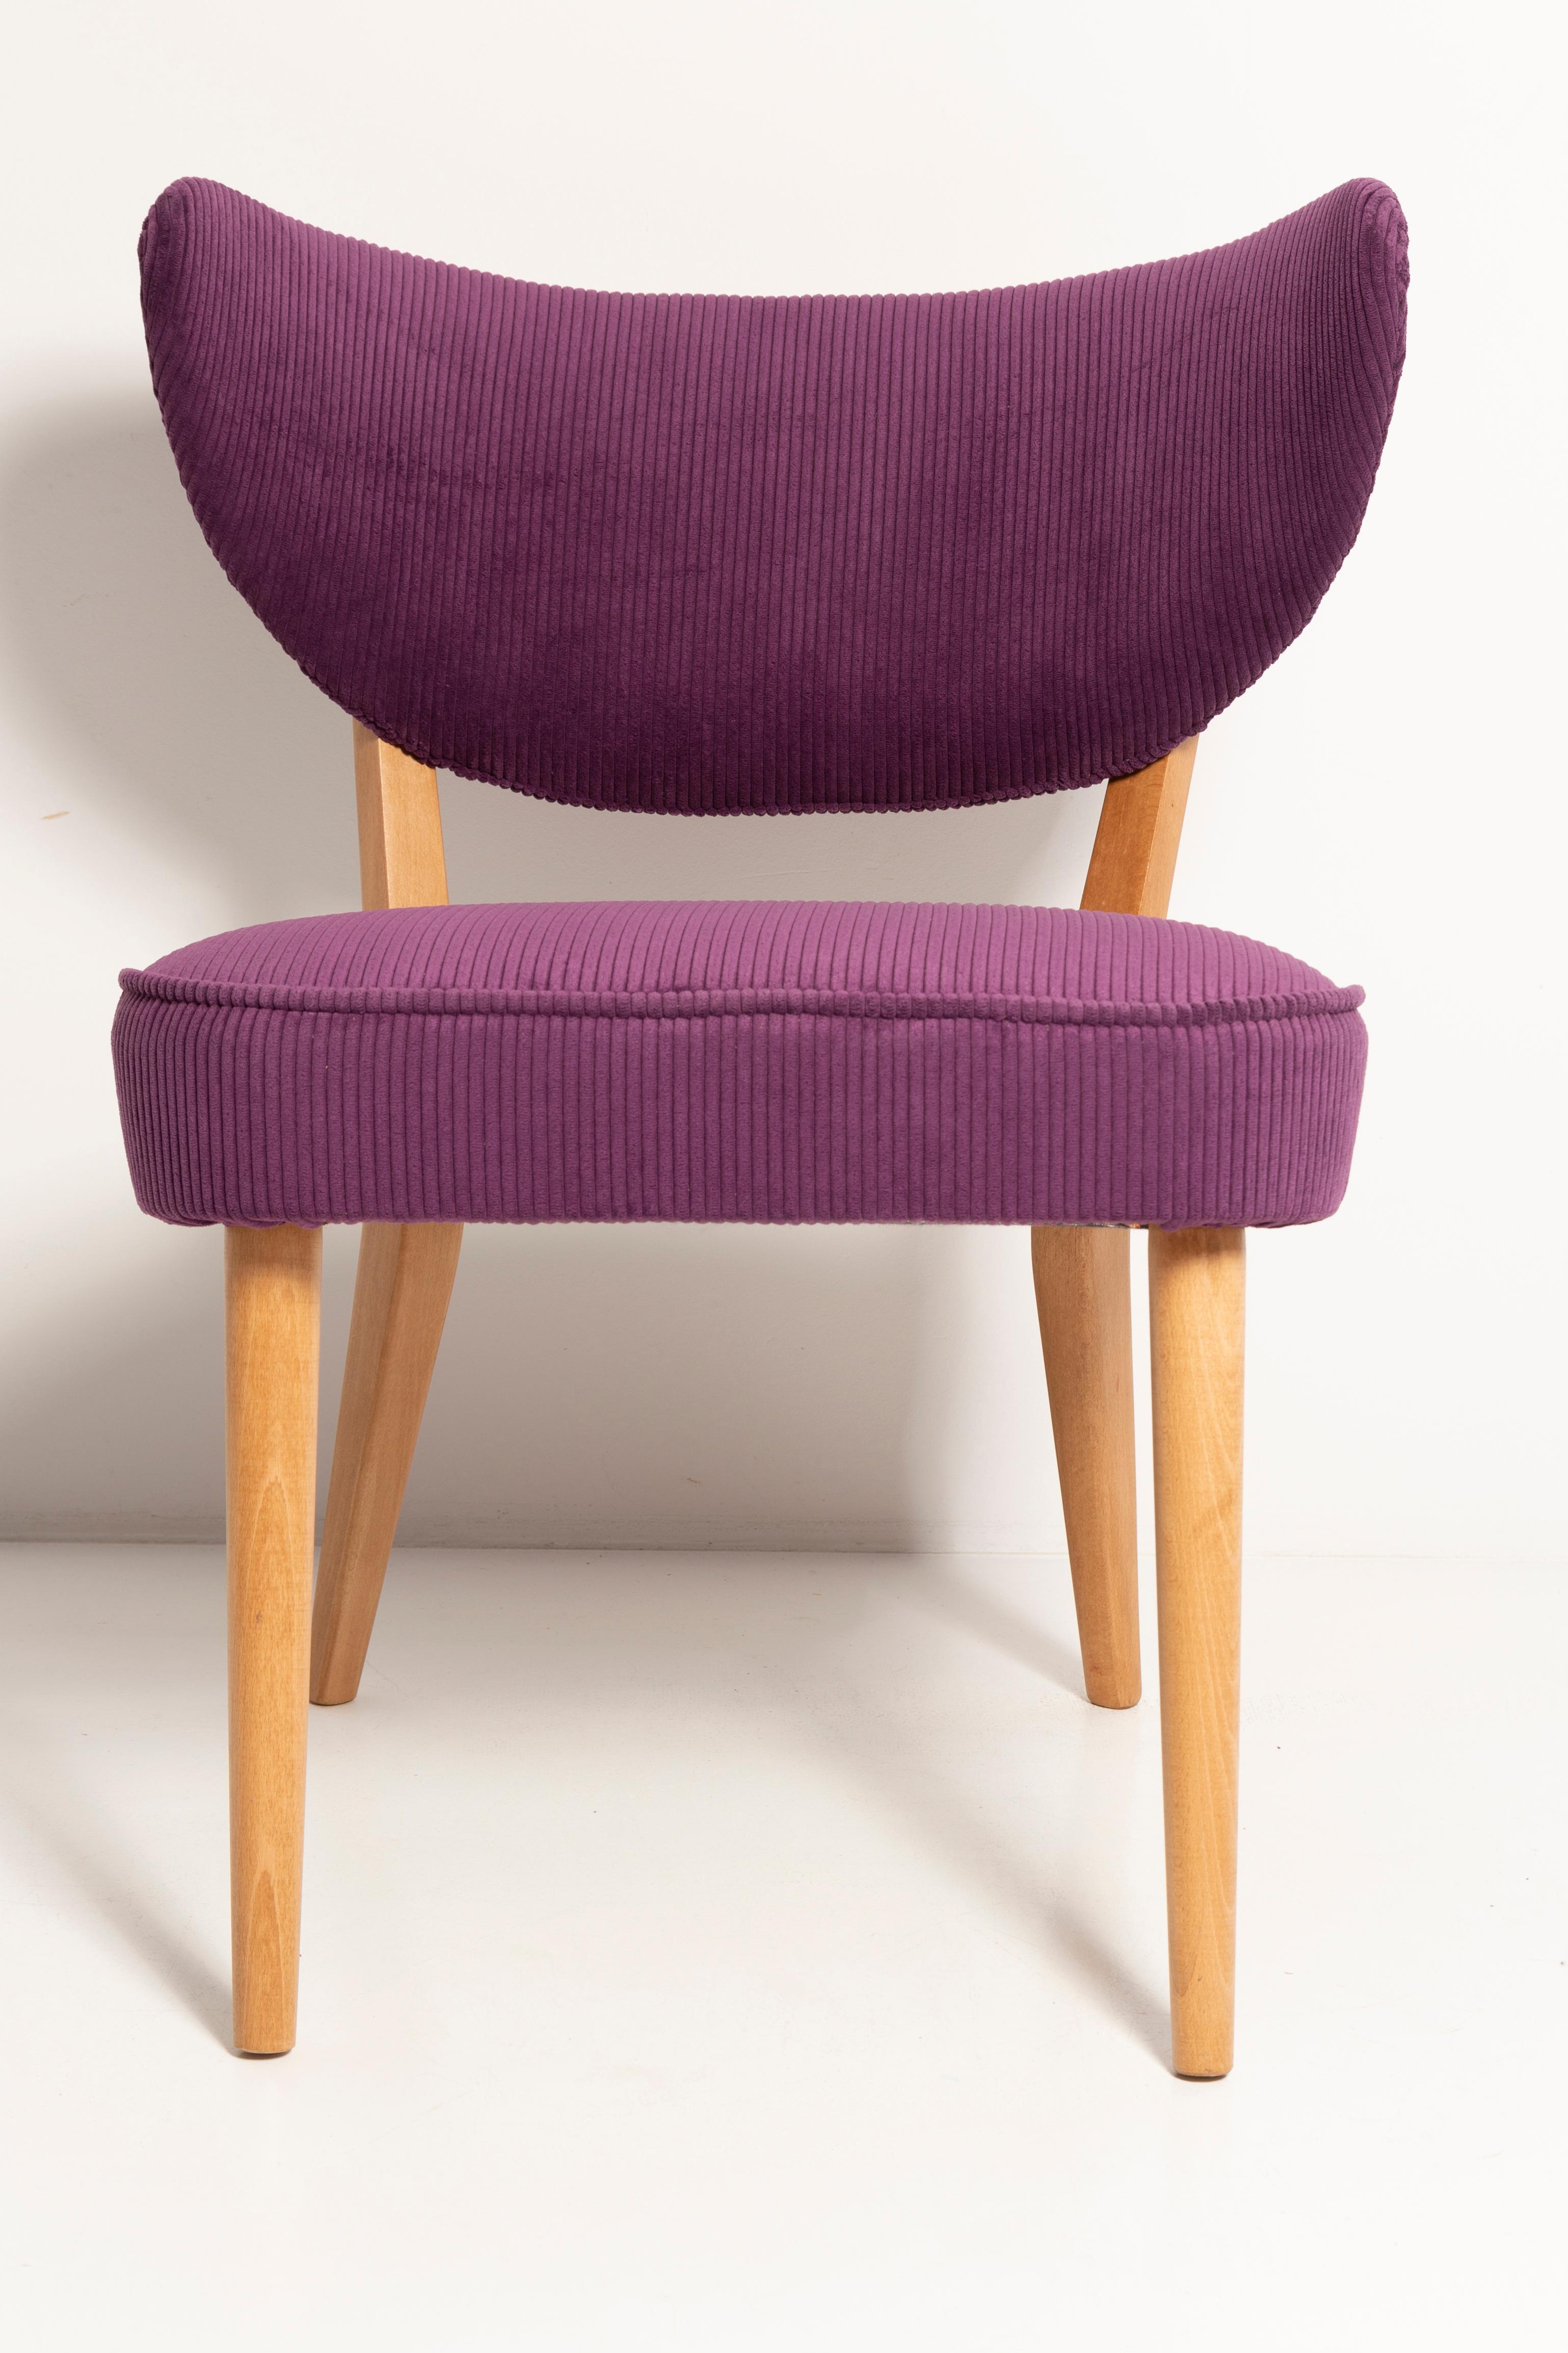 Pair of Midcentury Style Violet Velvet Club Chairs, by Vintola Studio, Europe For Sale 3